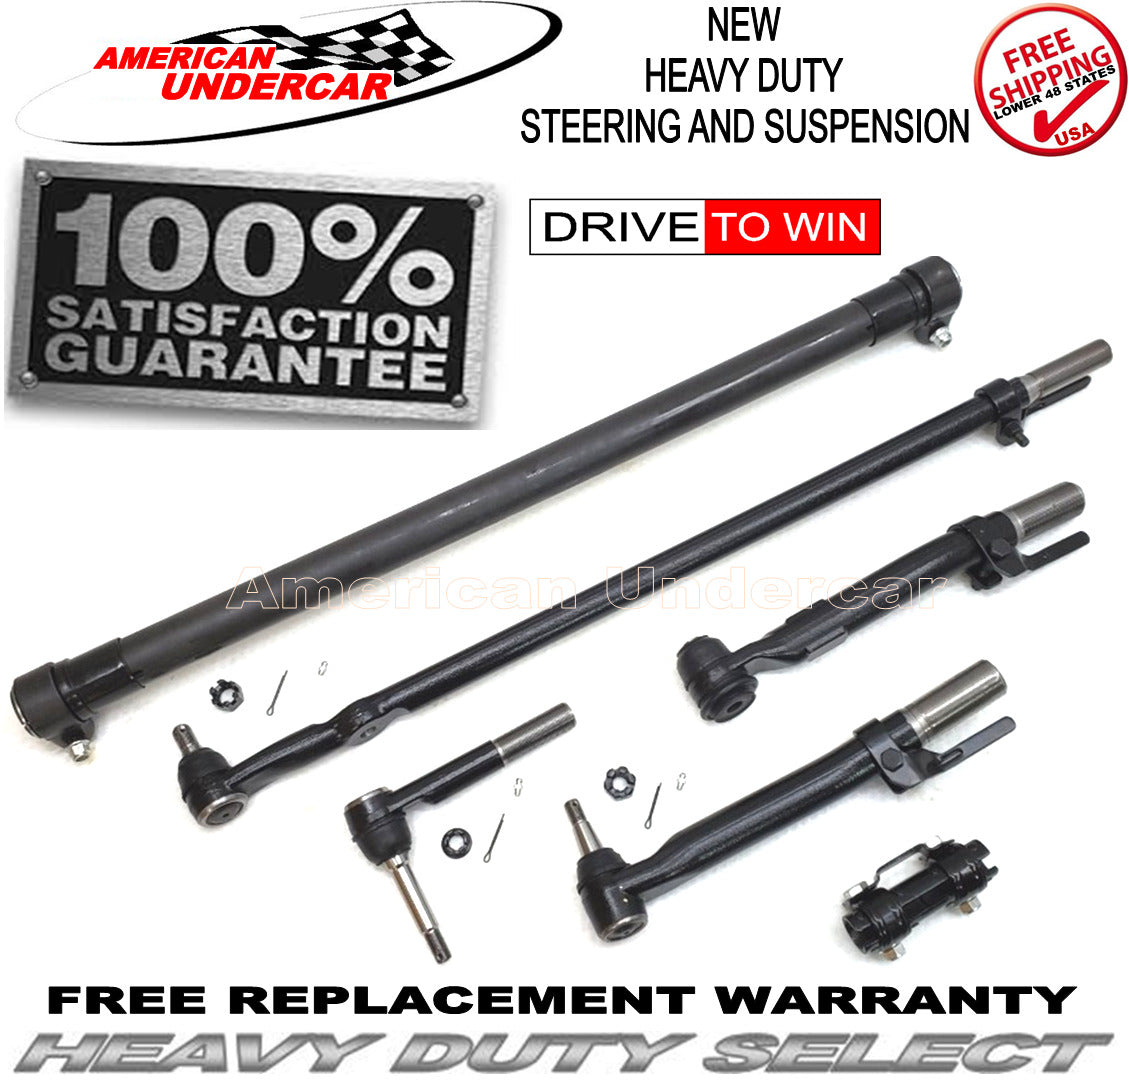 HD Drag Link Tie Rod Sleeve Steering Kit for 2011-2019 Ford F450, F550 Super Duty 4x4